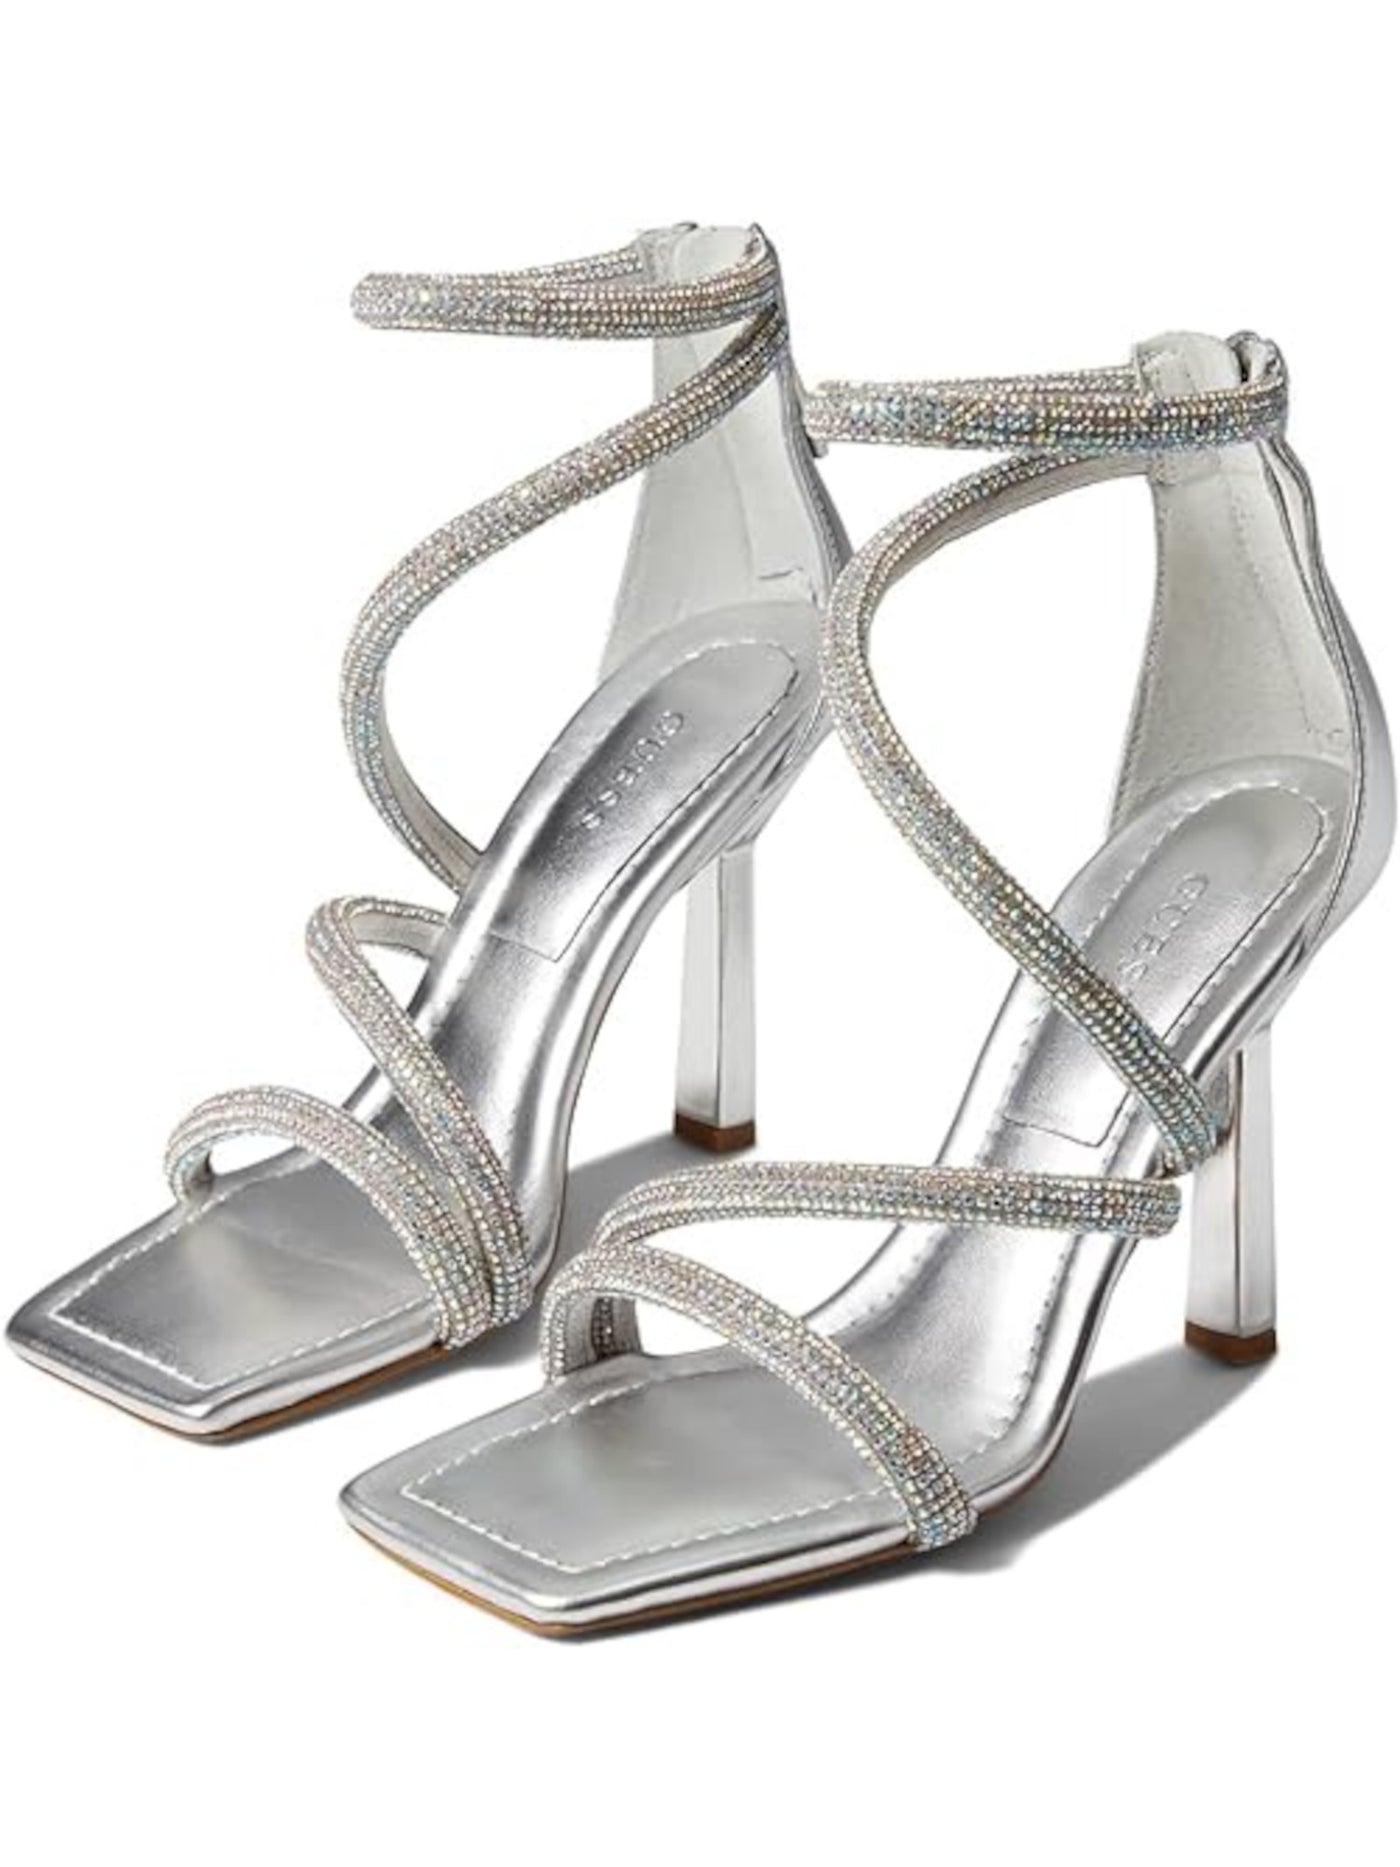 GUESS Womens Silver Padded Ankle Strap Embellished Lalali Square Toe Zip-Up Dress Heeled Sandal 6.5 M